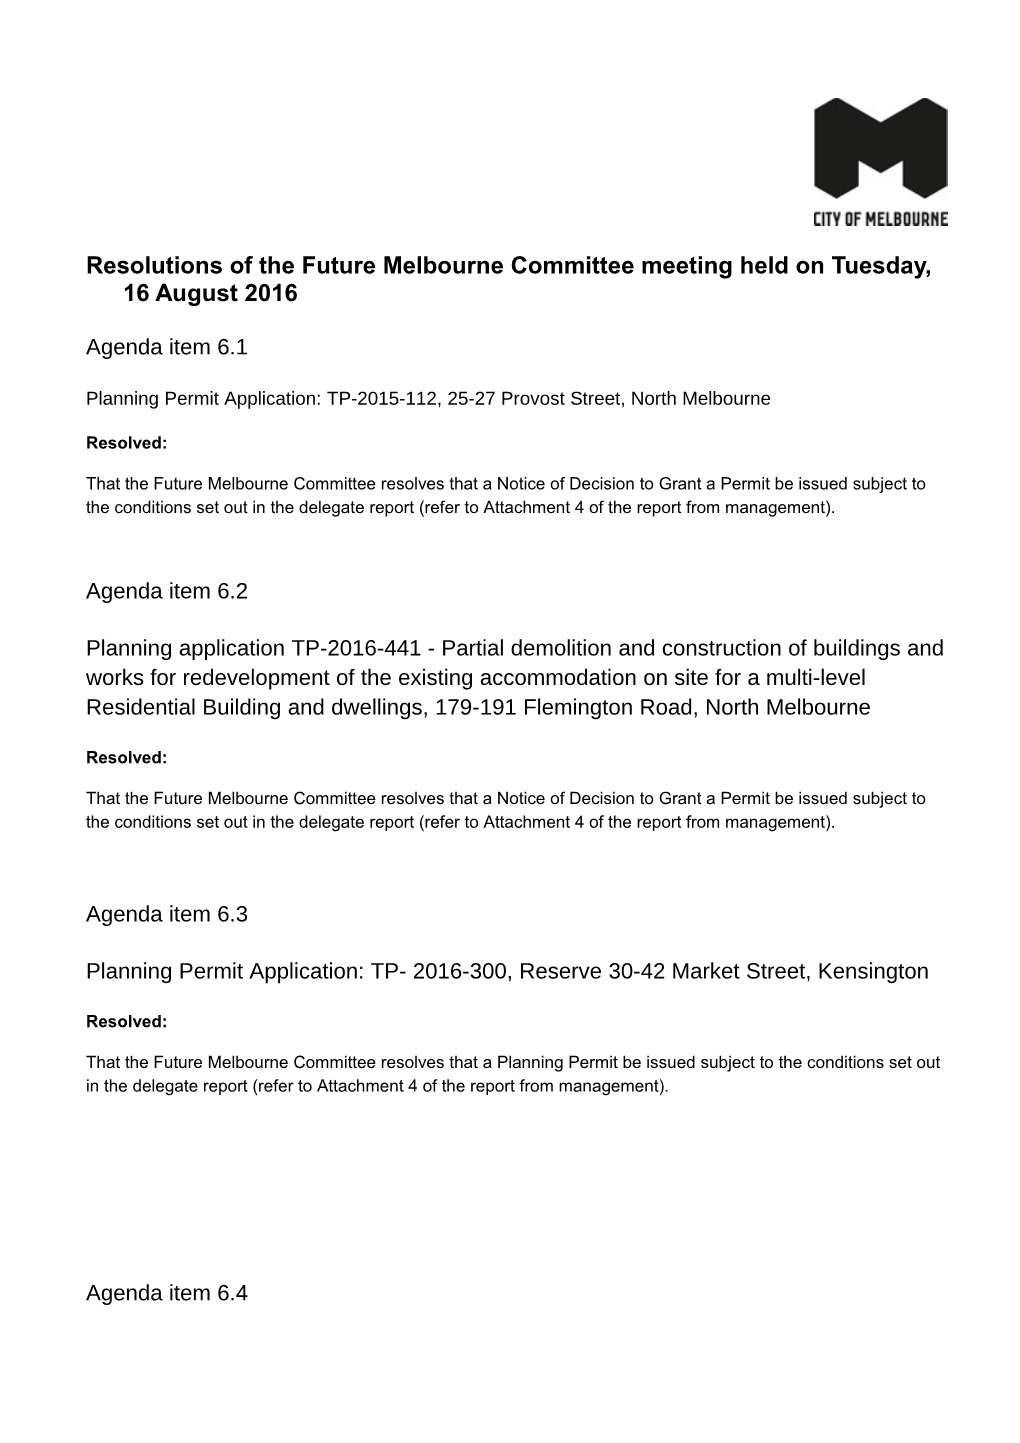 Resolutions of the Future Melbourne Committee Meeting Held on Tuesday, 16 August 2016